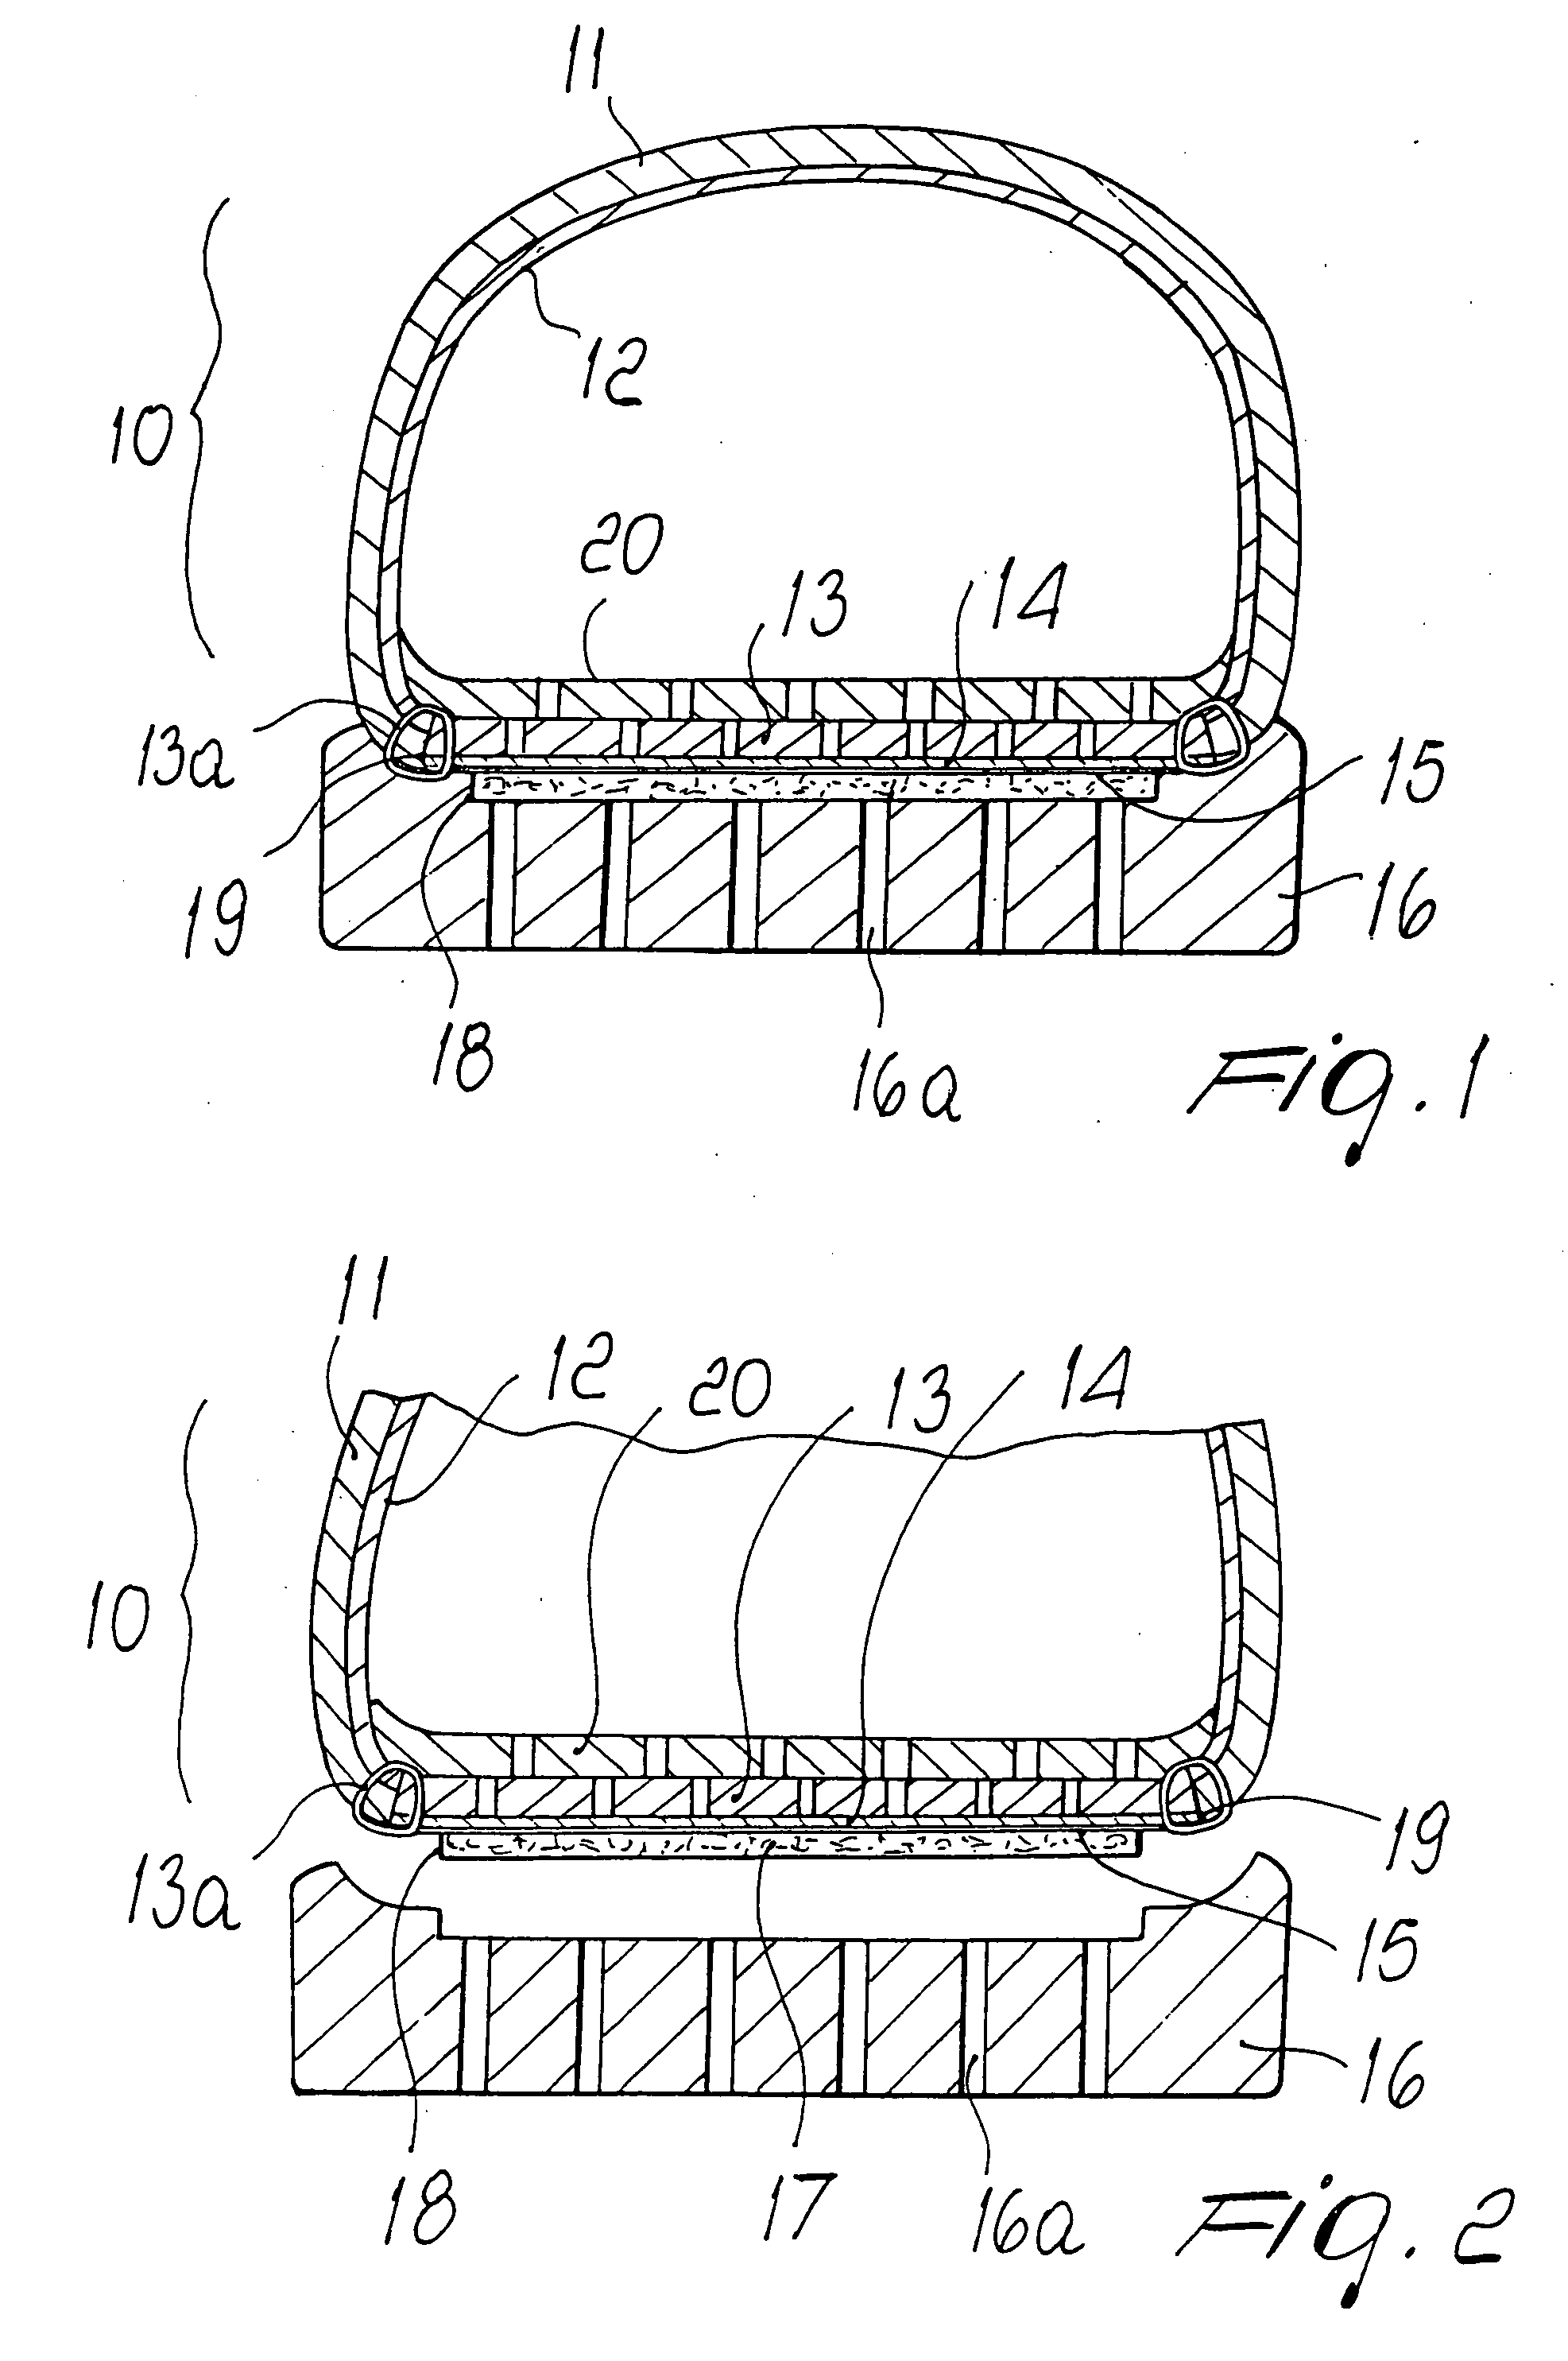 Method for manufacturing breathable shoe